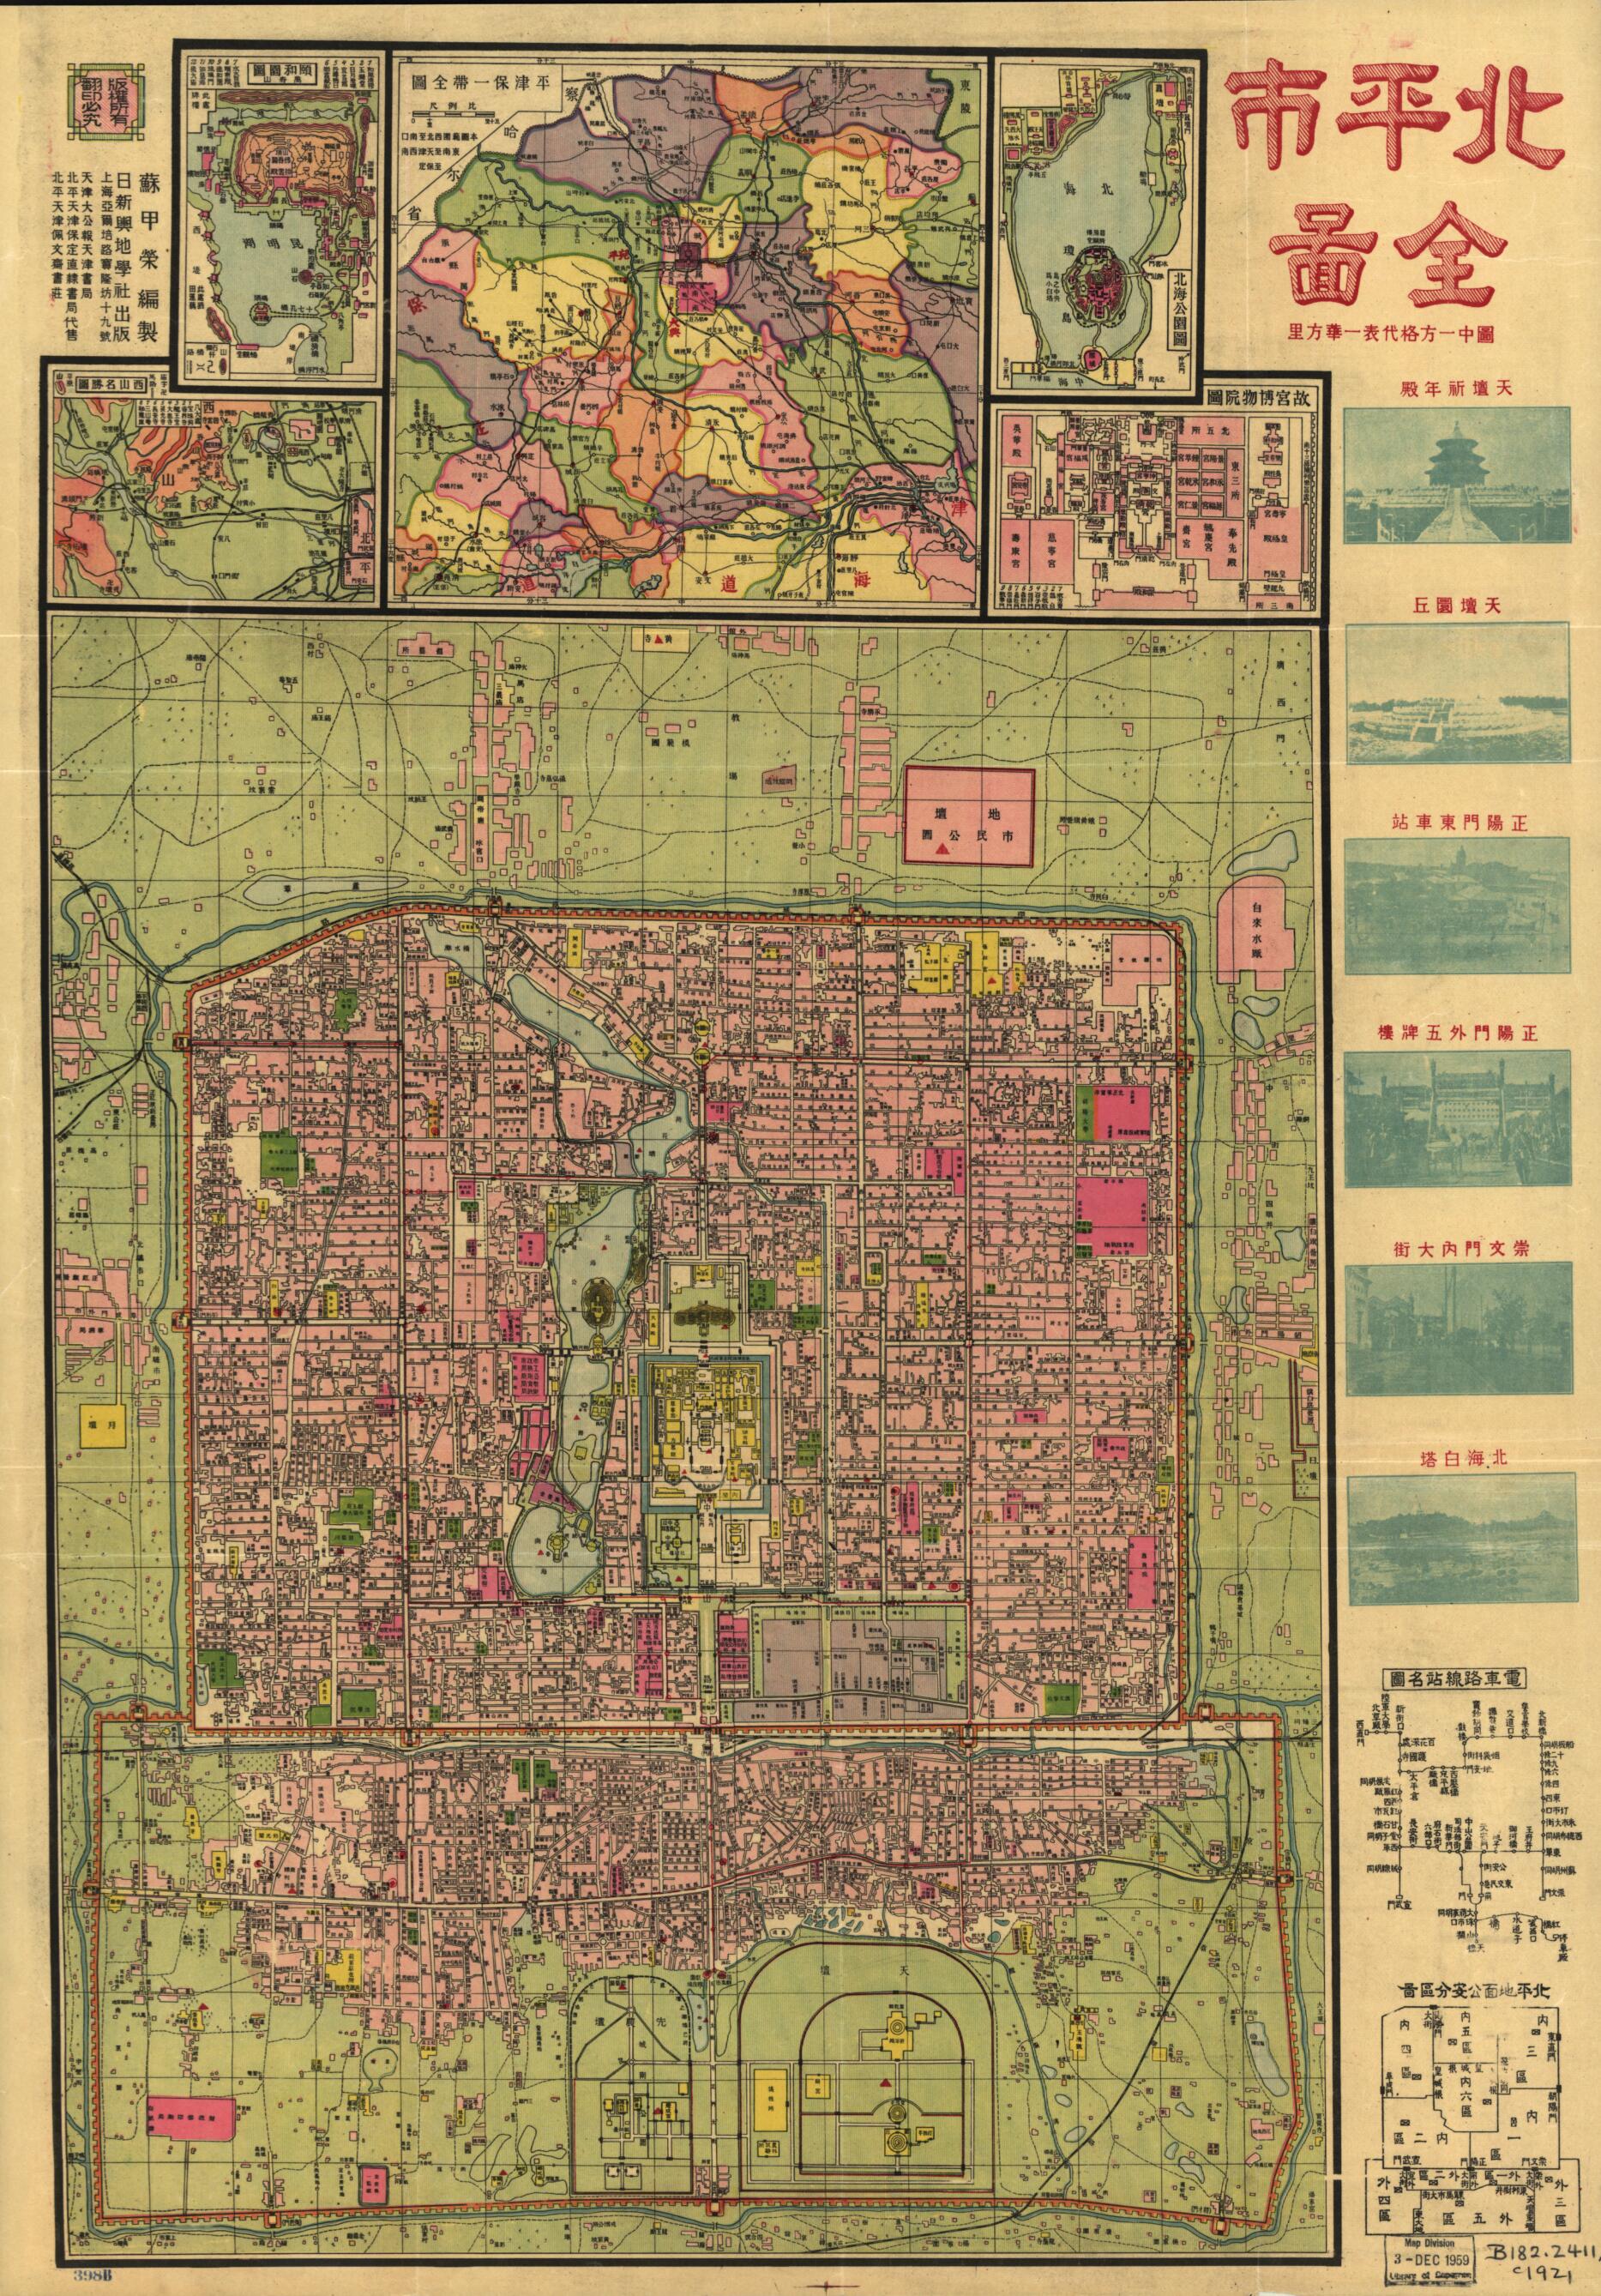 This old map of Beiping Shi Quan Tu from 1921 was created by Jiarong Su in 1921